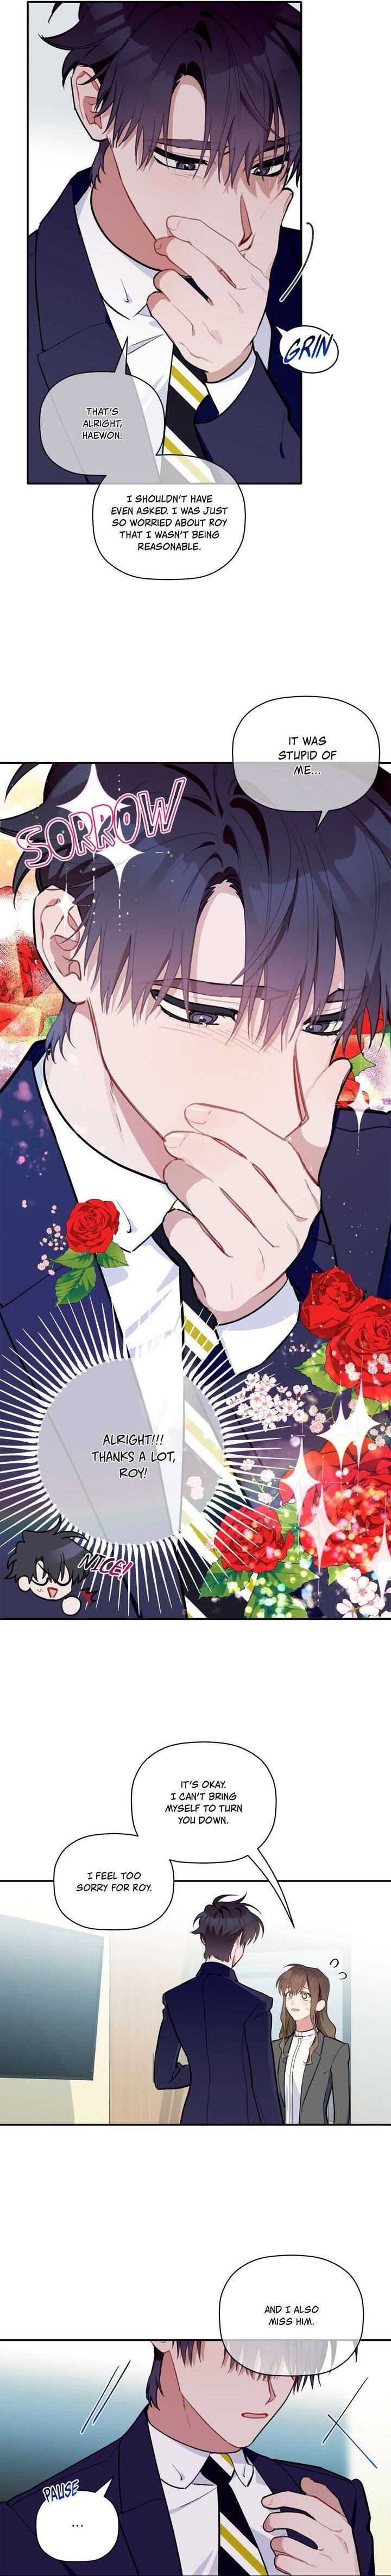 Give Me a Flower, and I'll Give You All of Me Chapter 43 page 5